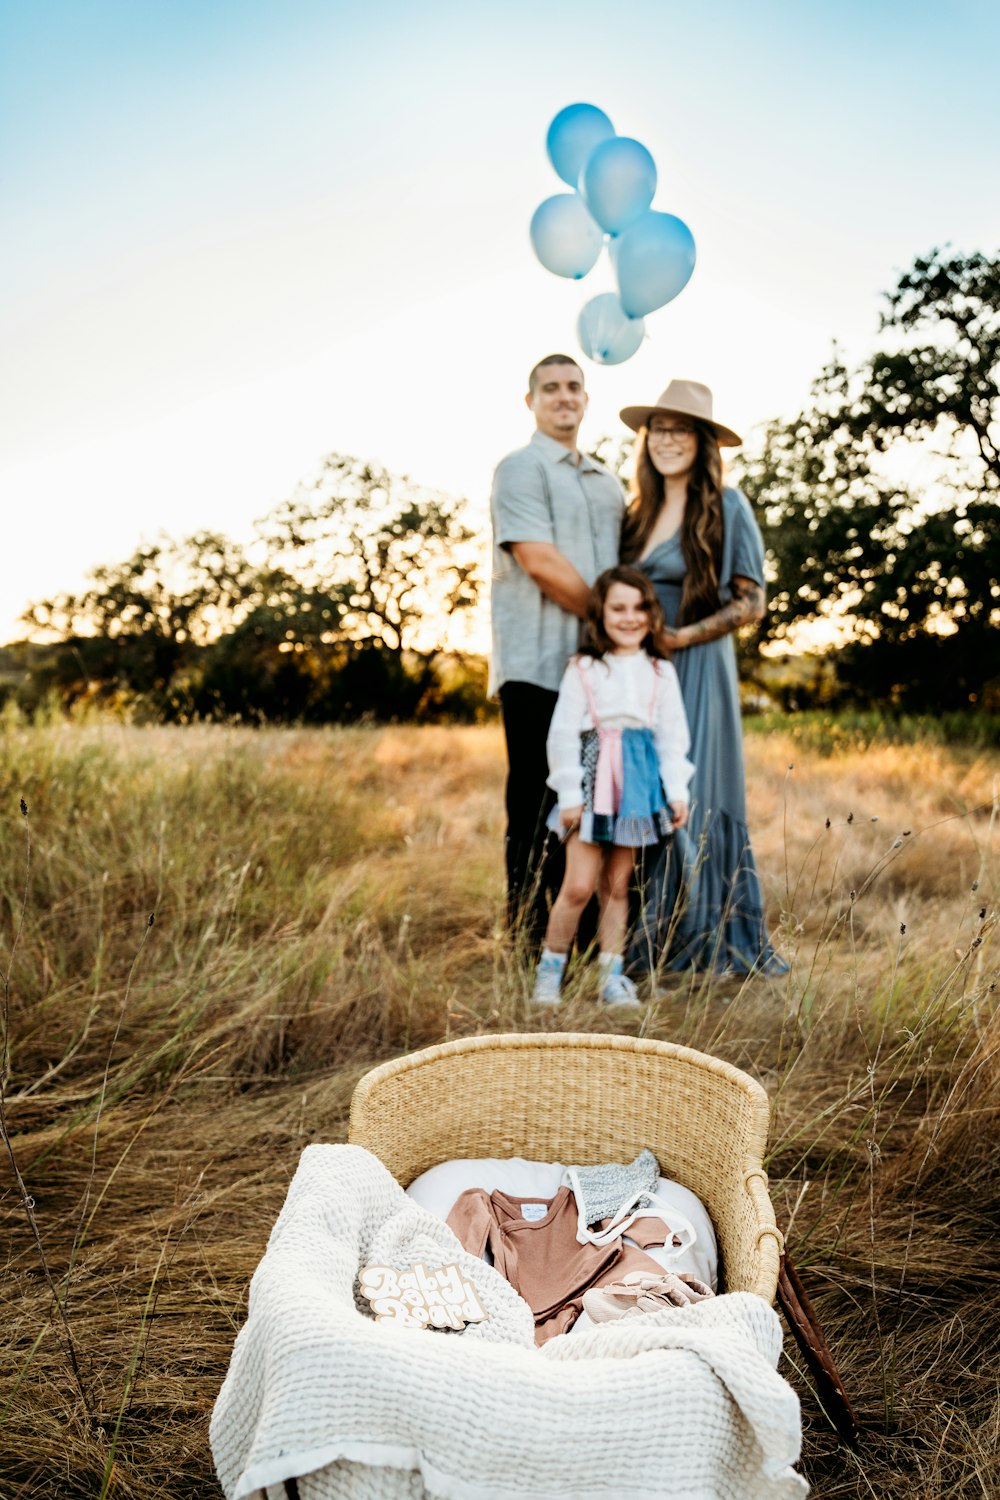 a family standing in a field with balloons